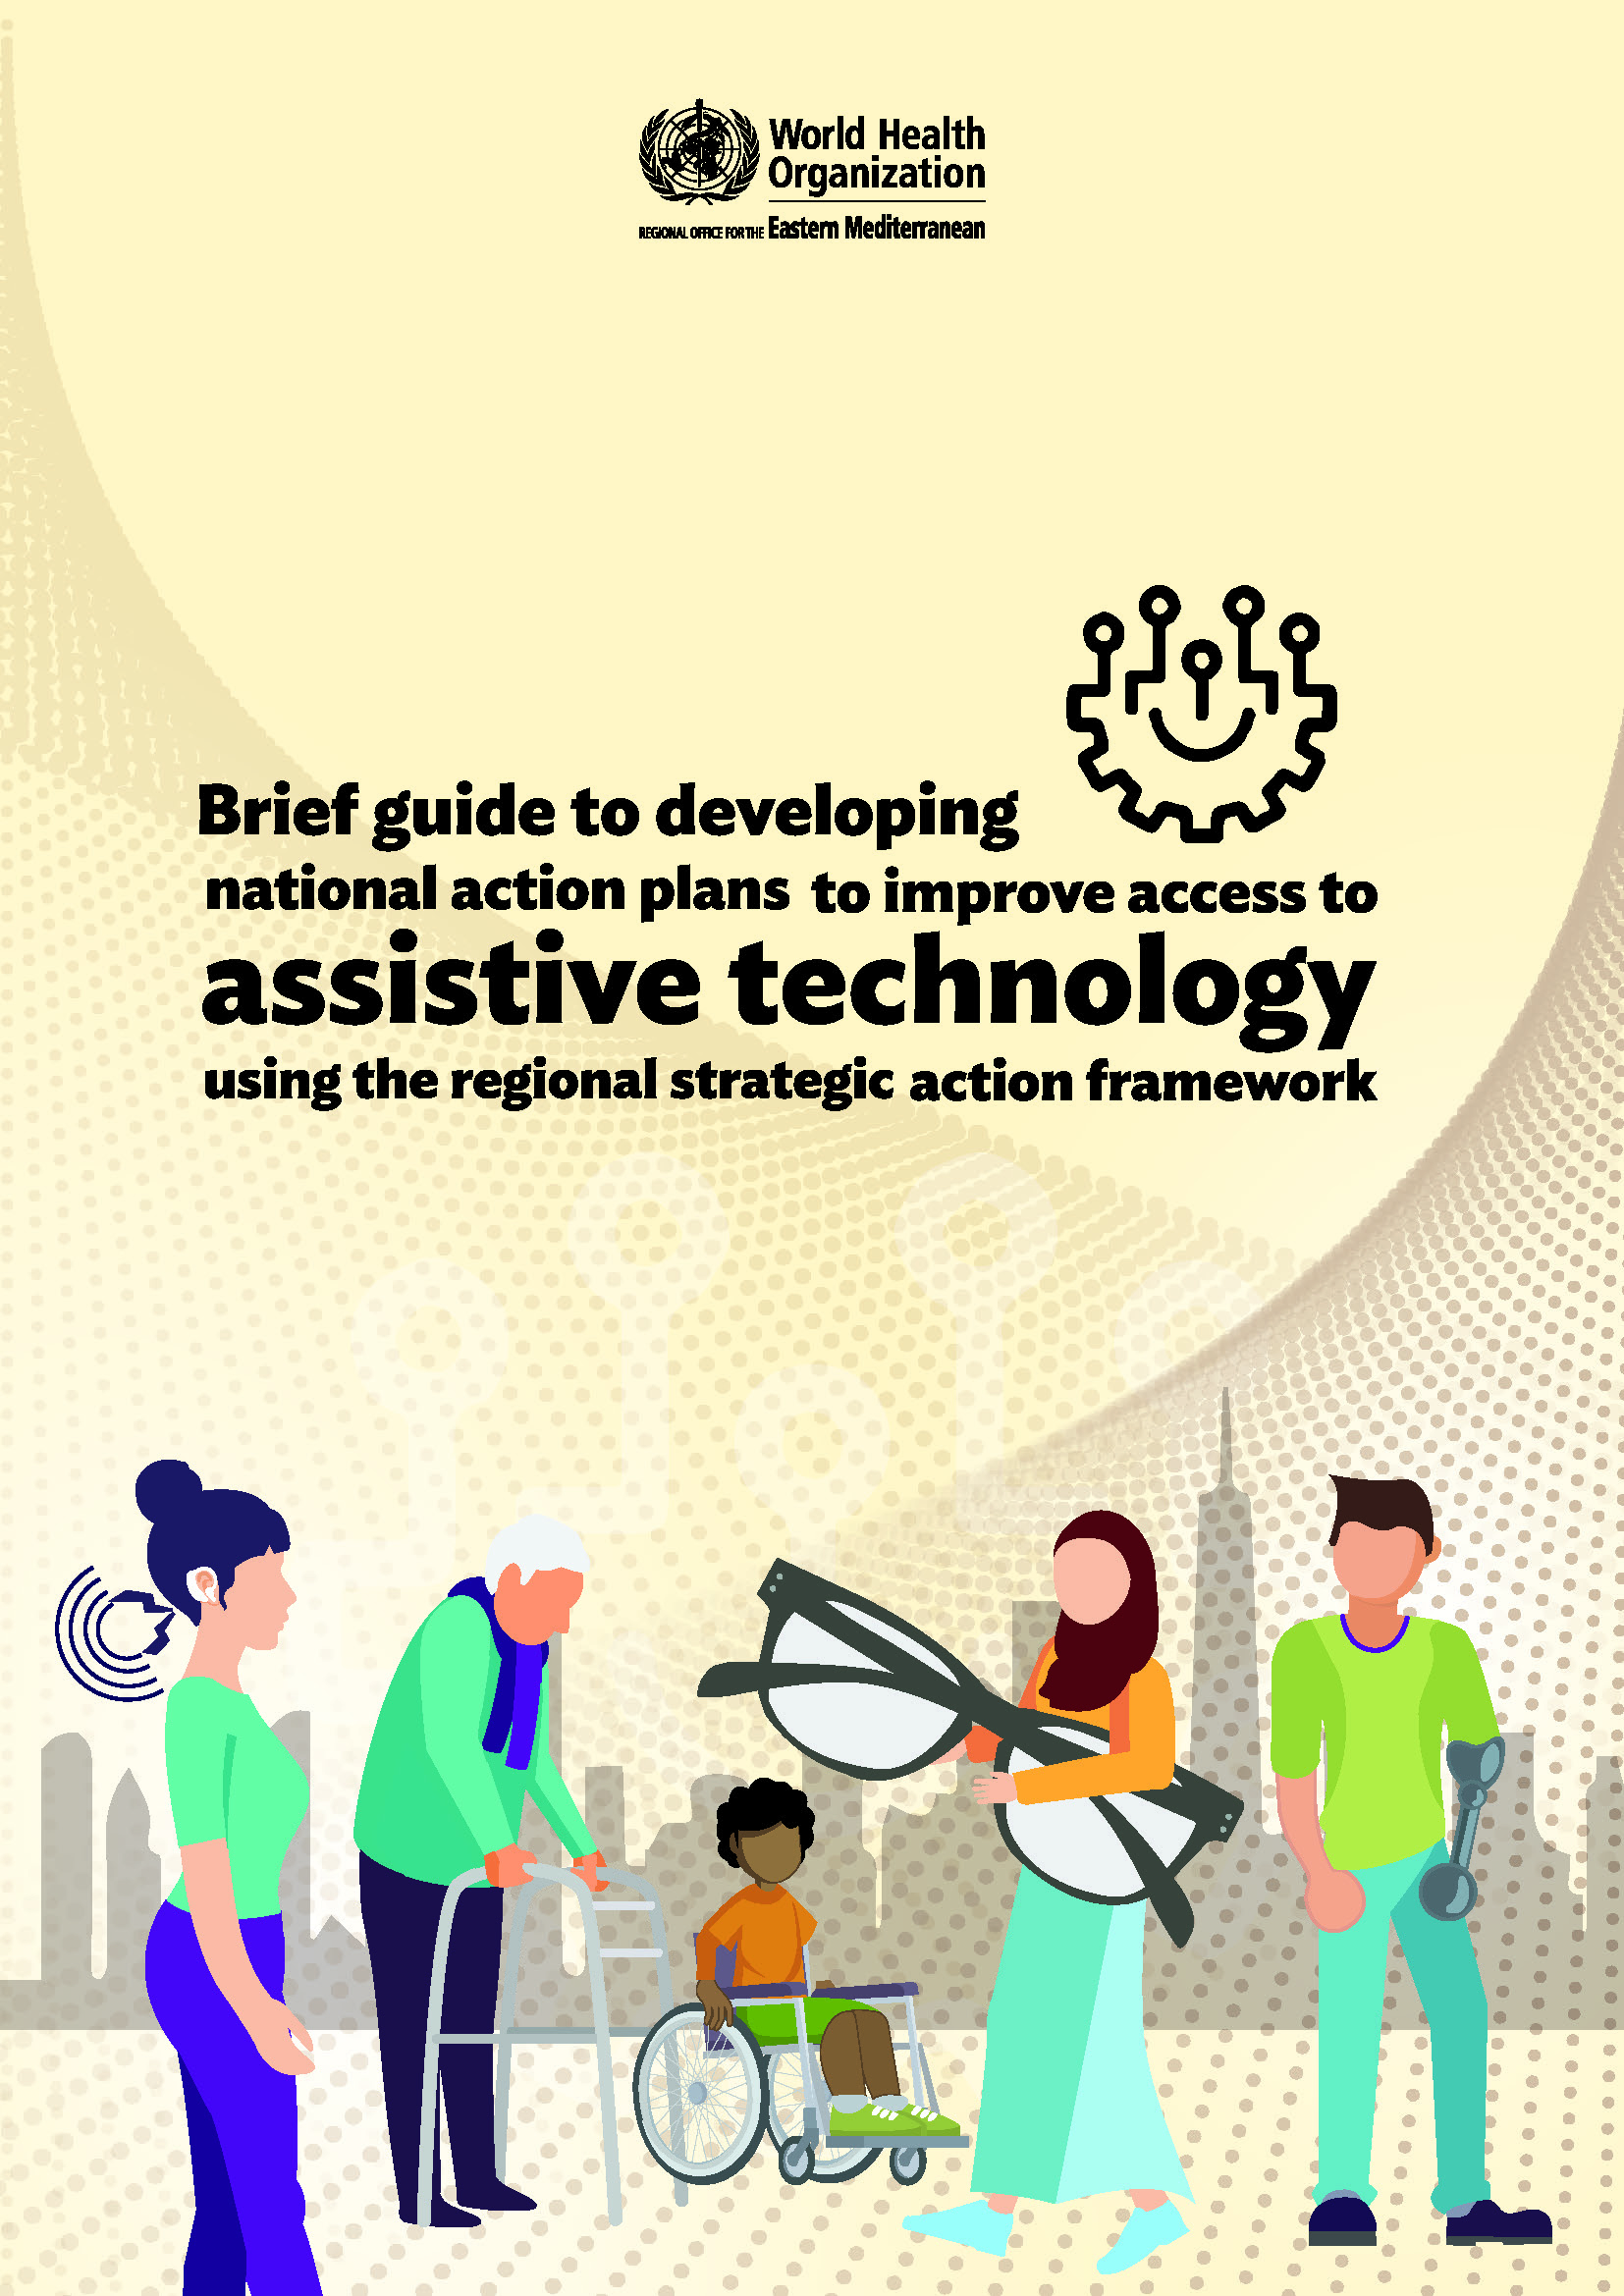 Brief guide to developing national action plans to improve access to assistive technology using the regional strategic action framework